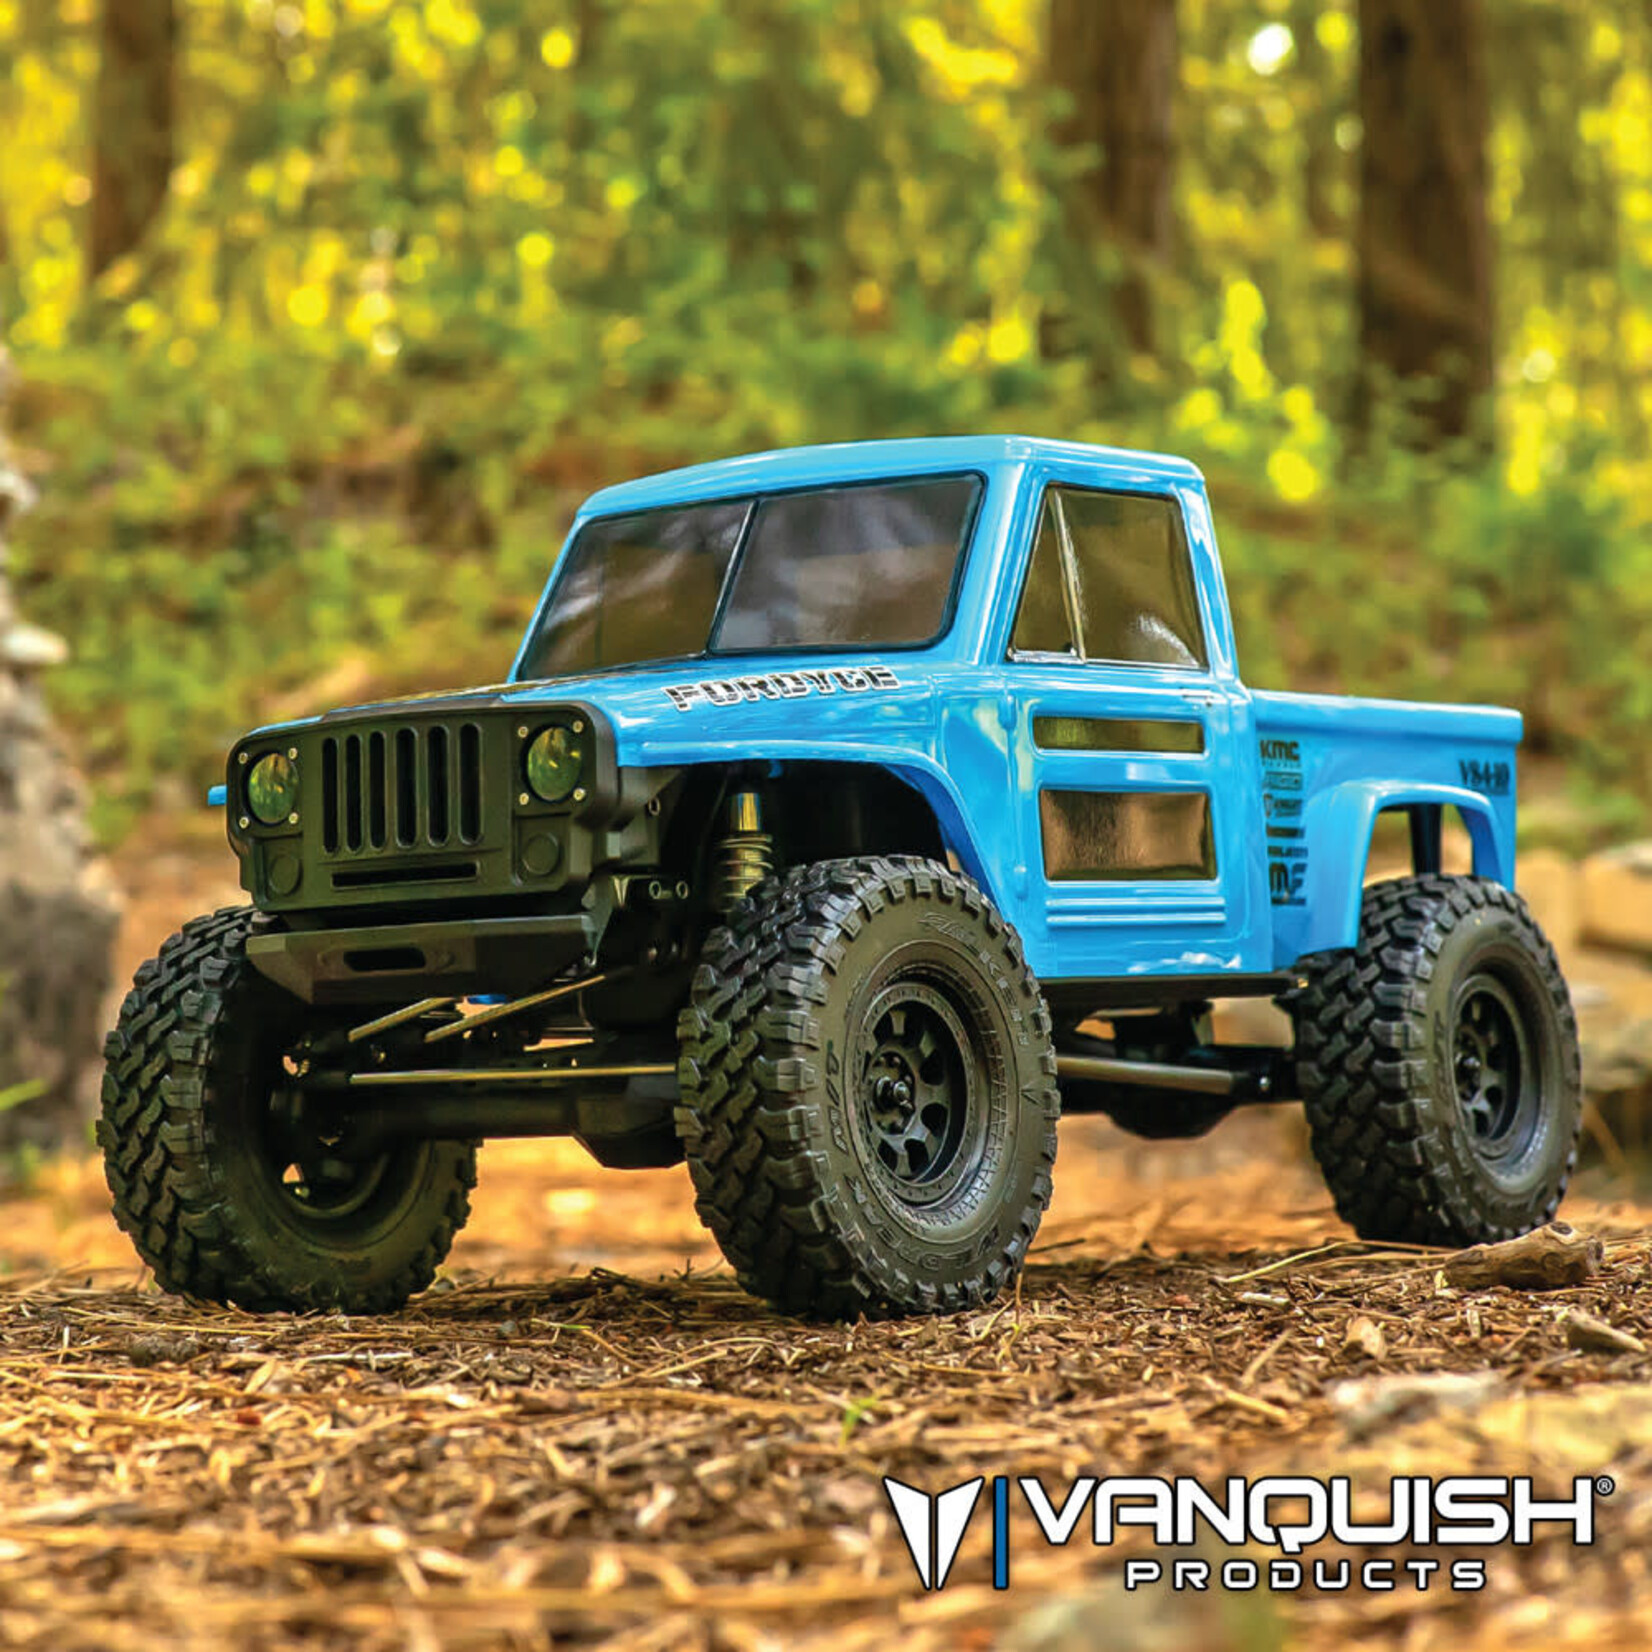 Vanquish Products 1/10 VS4-10 Fordyce Straight Axle RTR Rock Crawler